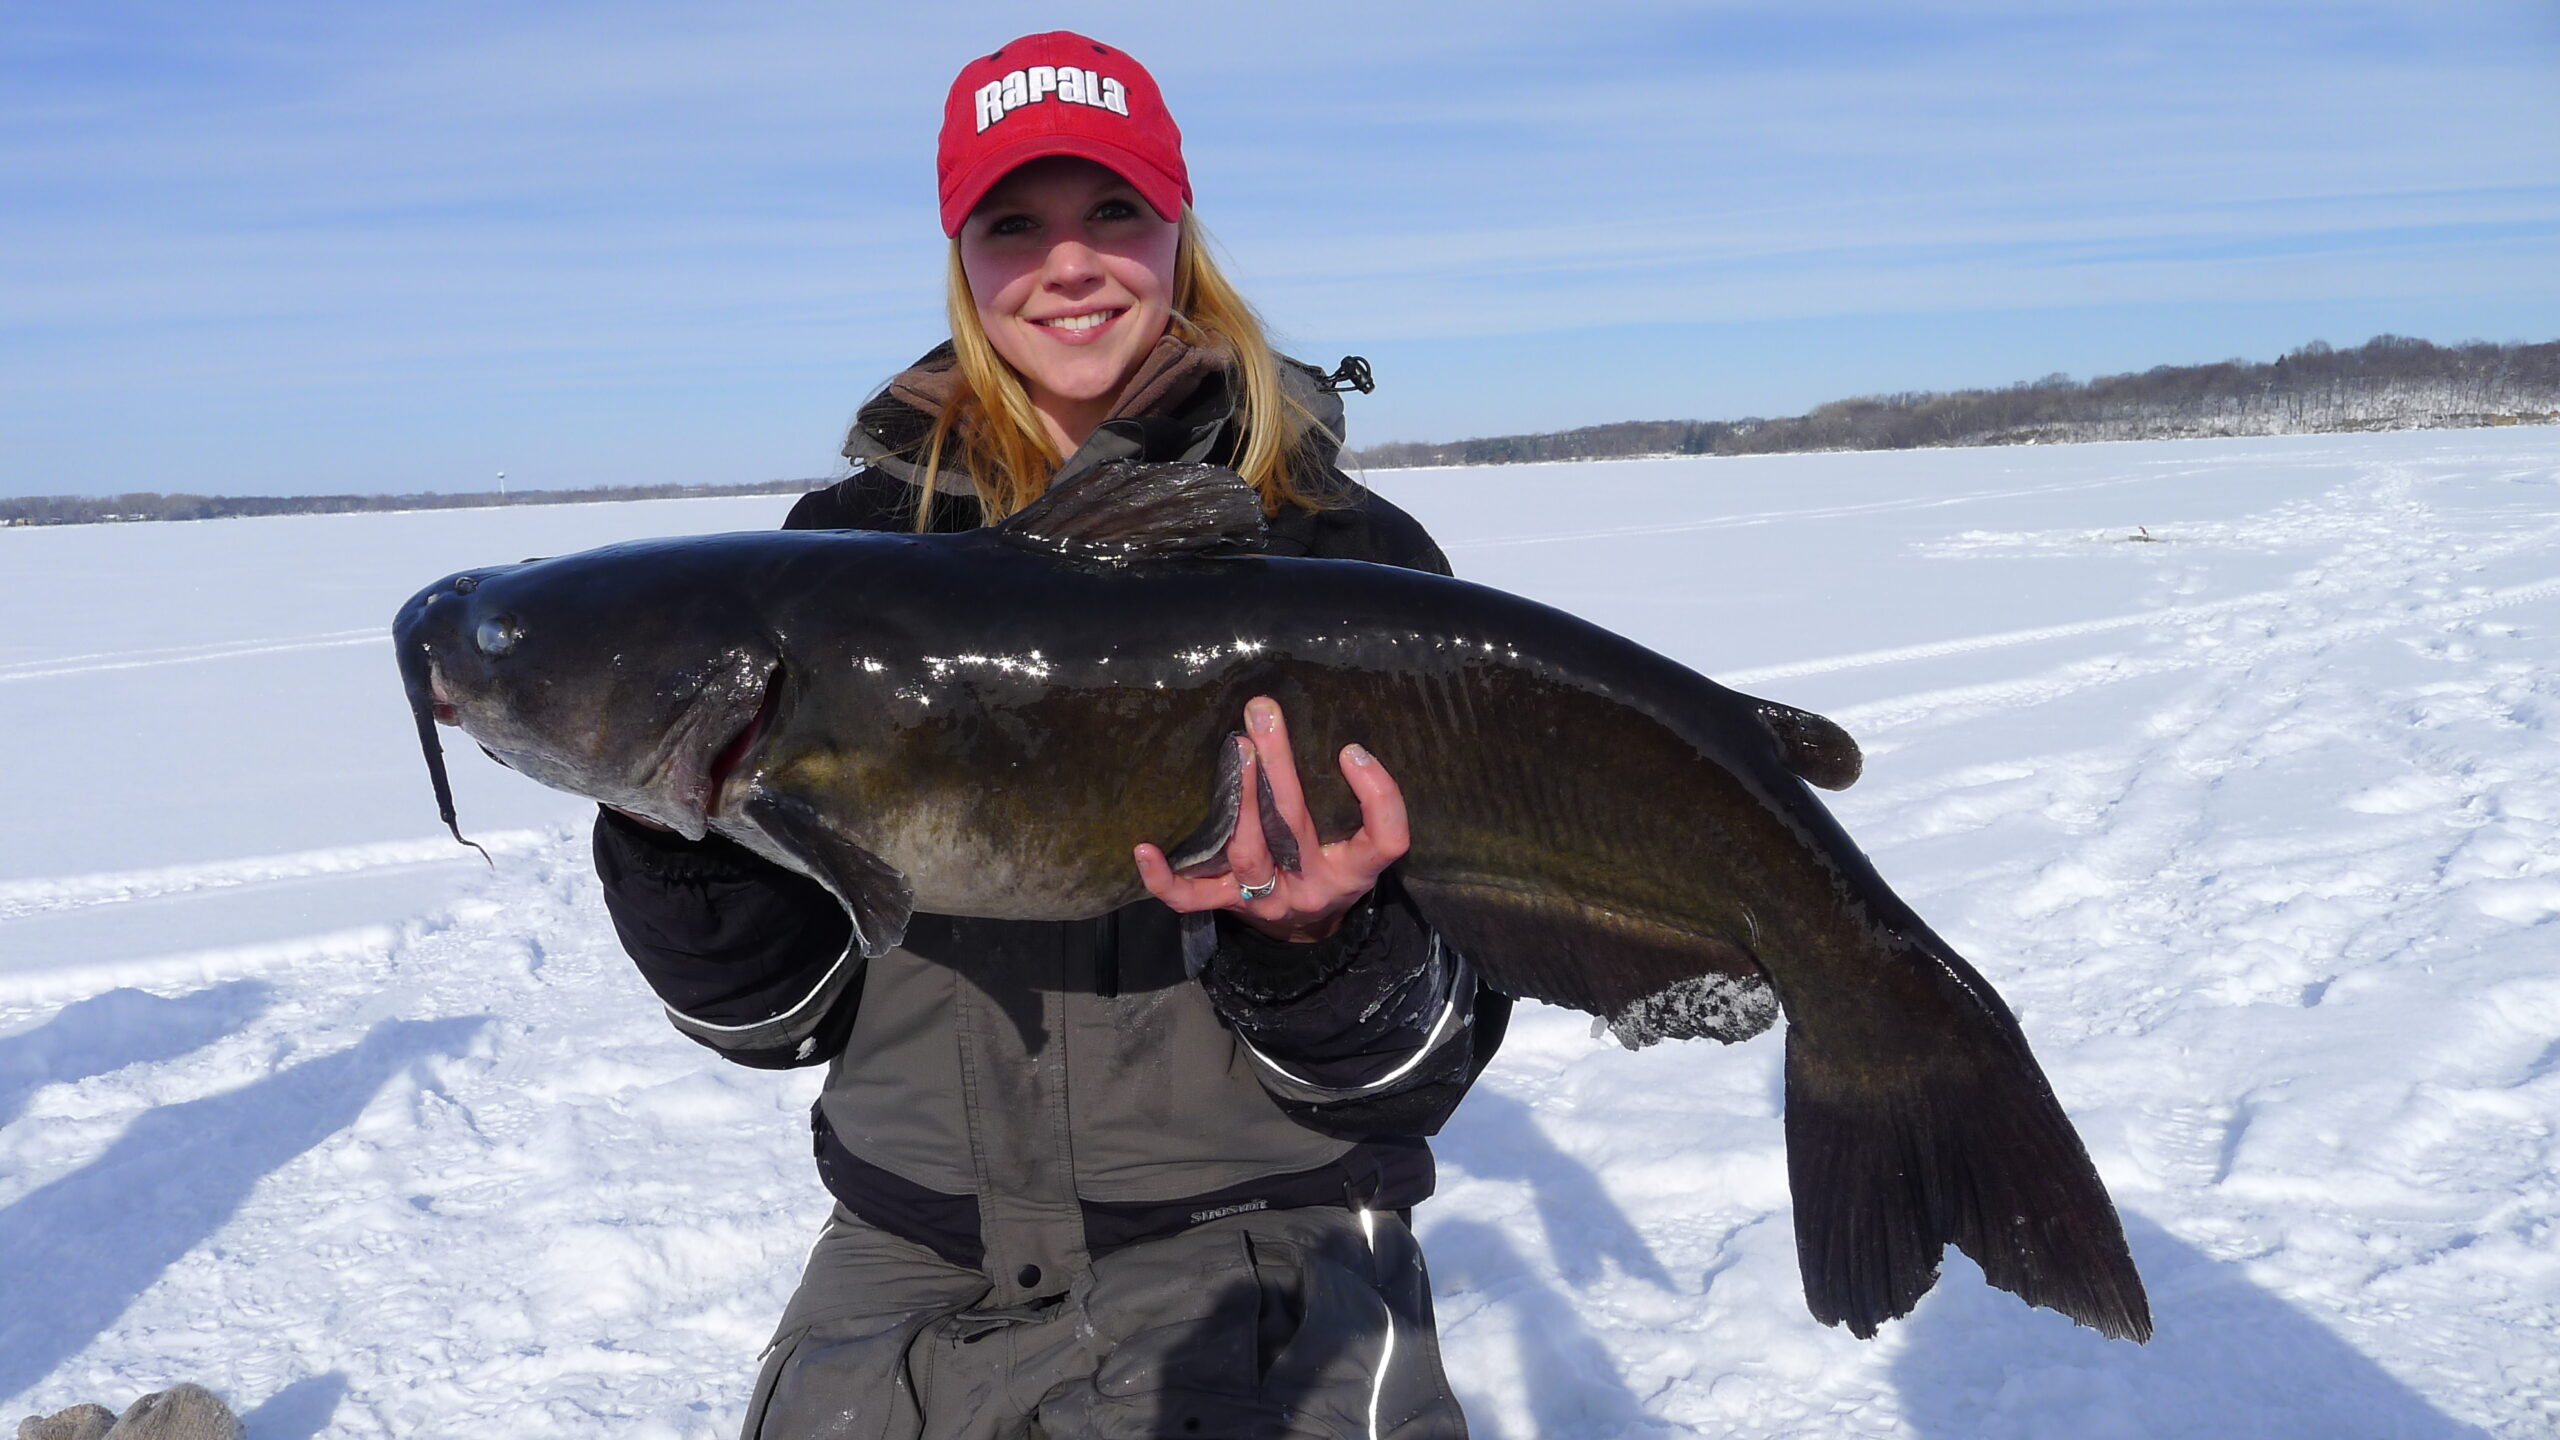 Fun facts about ice fishing